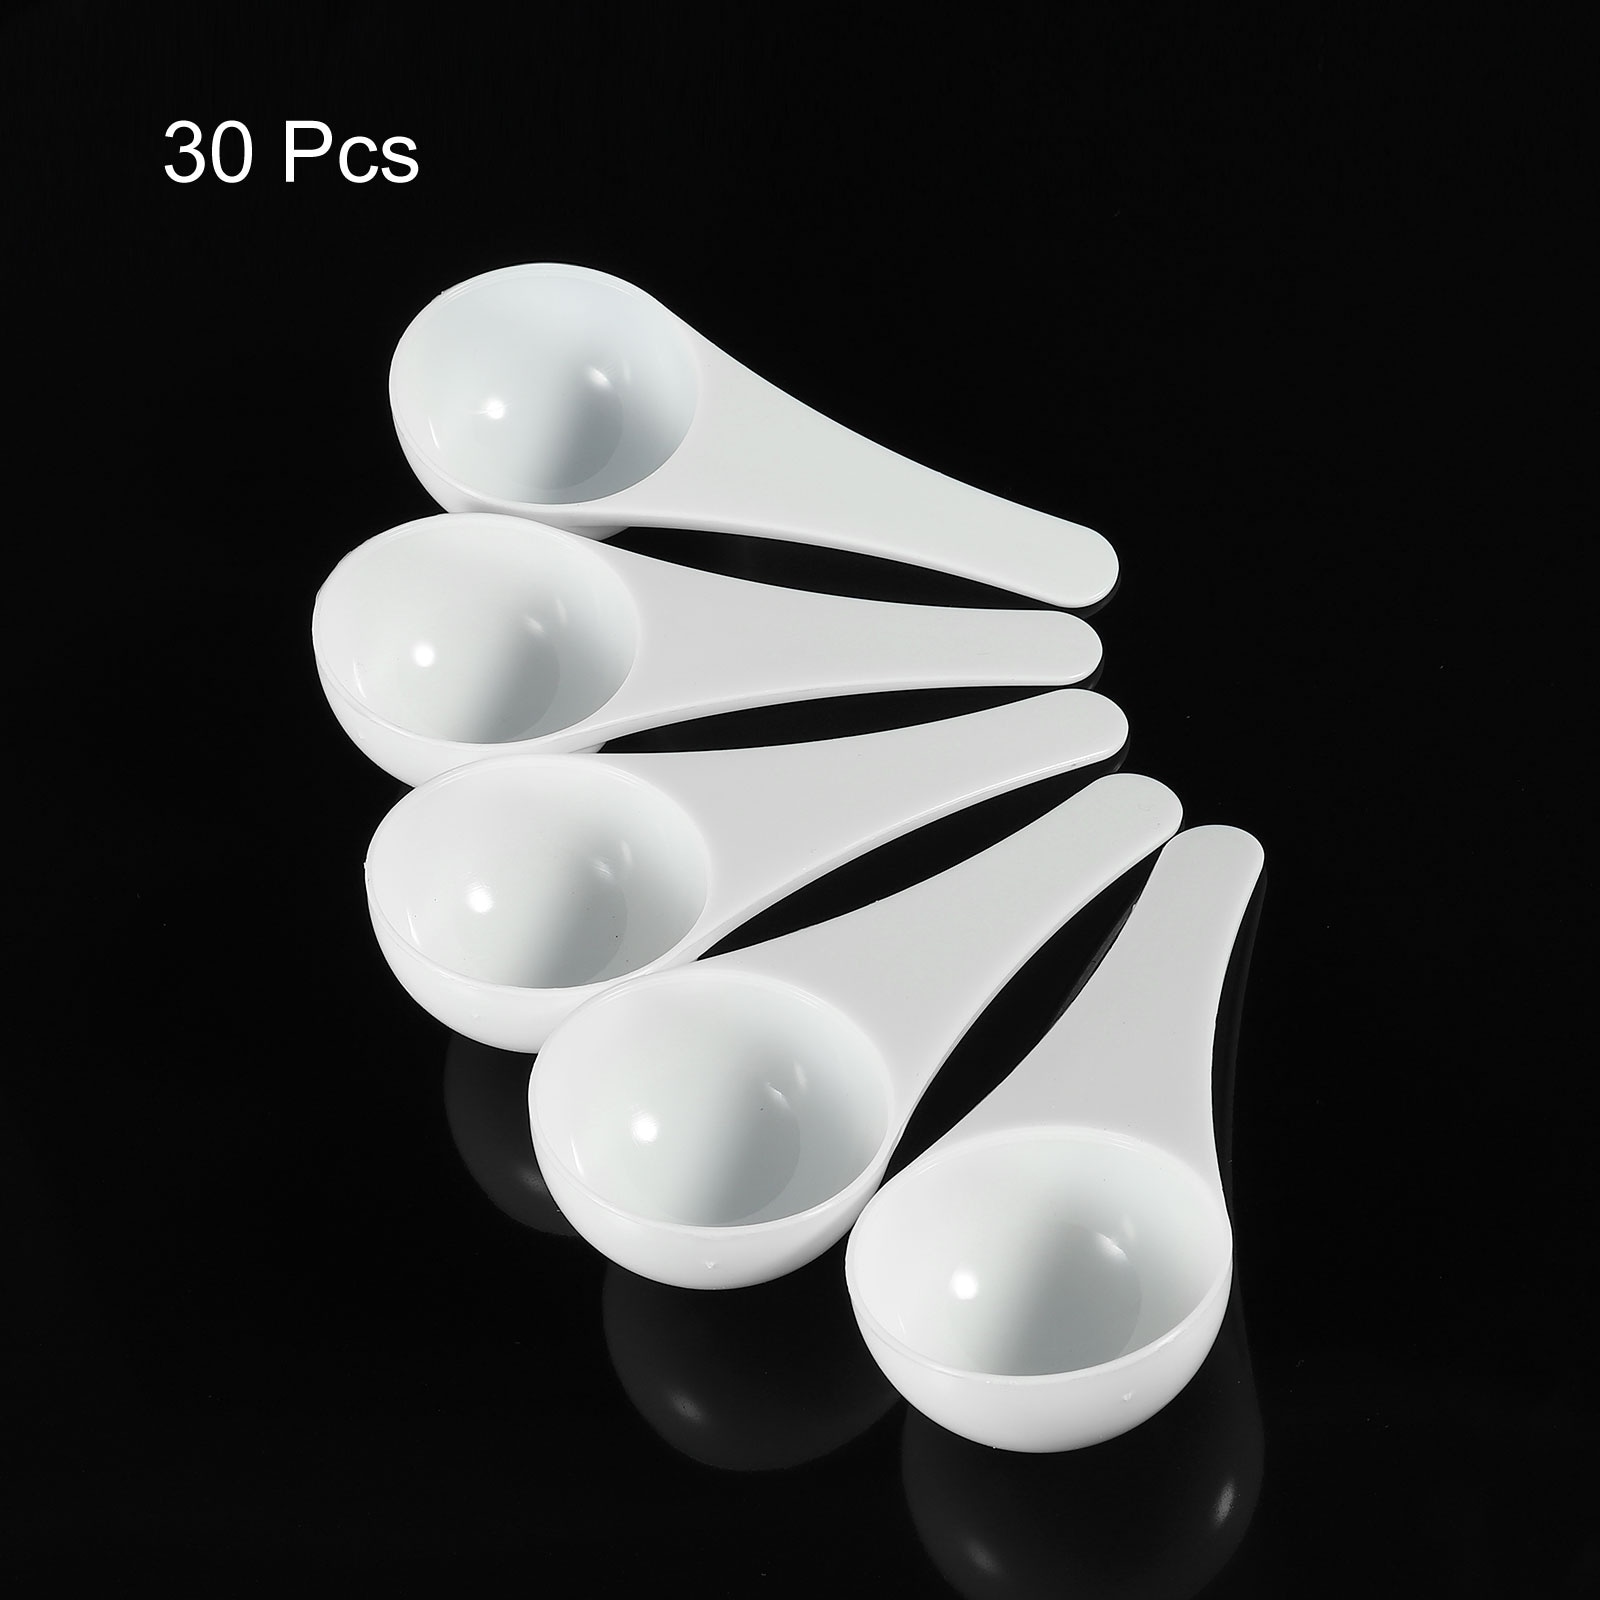 Micro Spoons 1 Gram Measuring Scoop Round Bottom w Hanging Hole 30Pcs -  White - Bed Bath & Beyond - 35770756